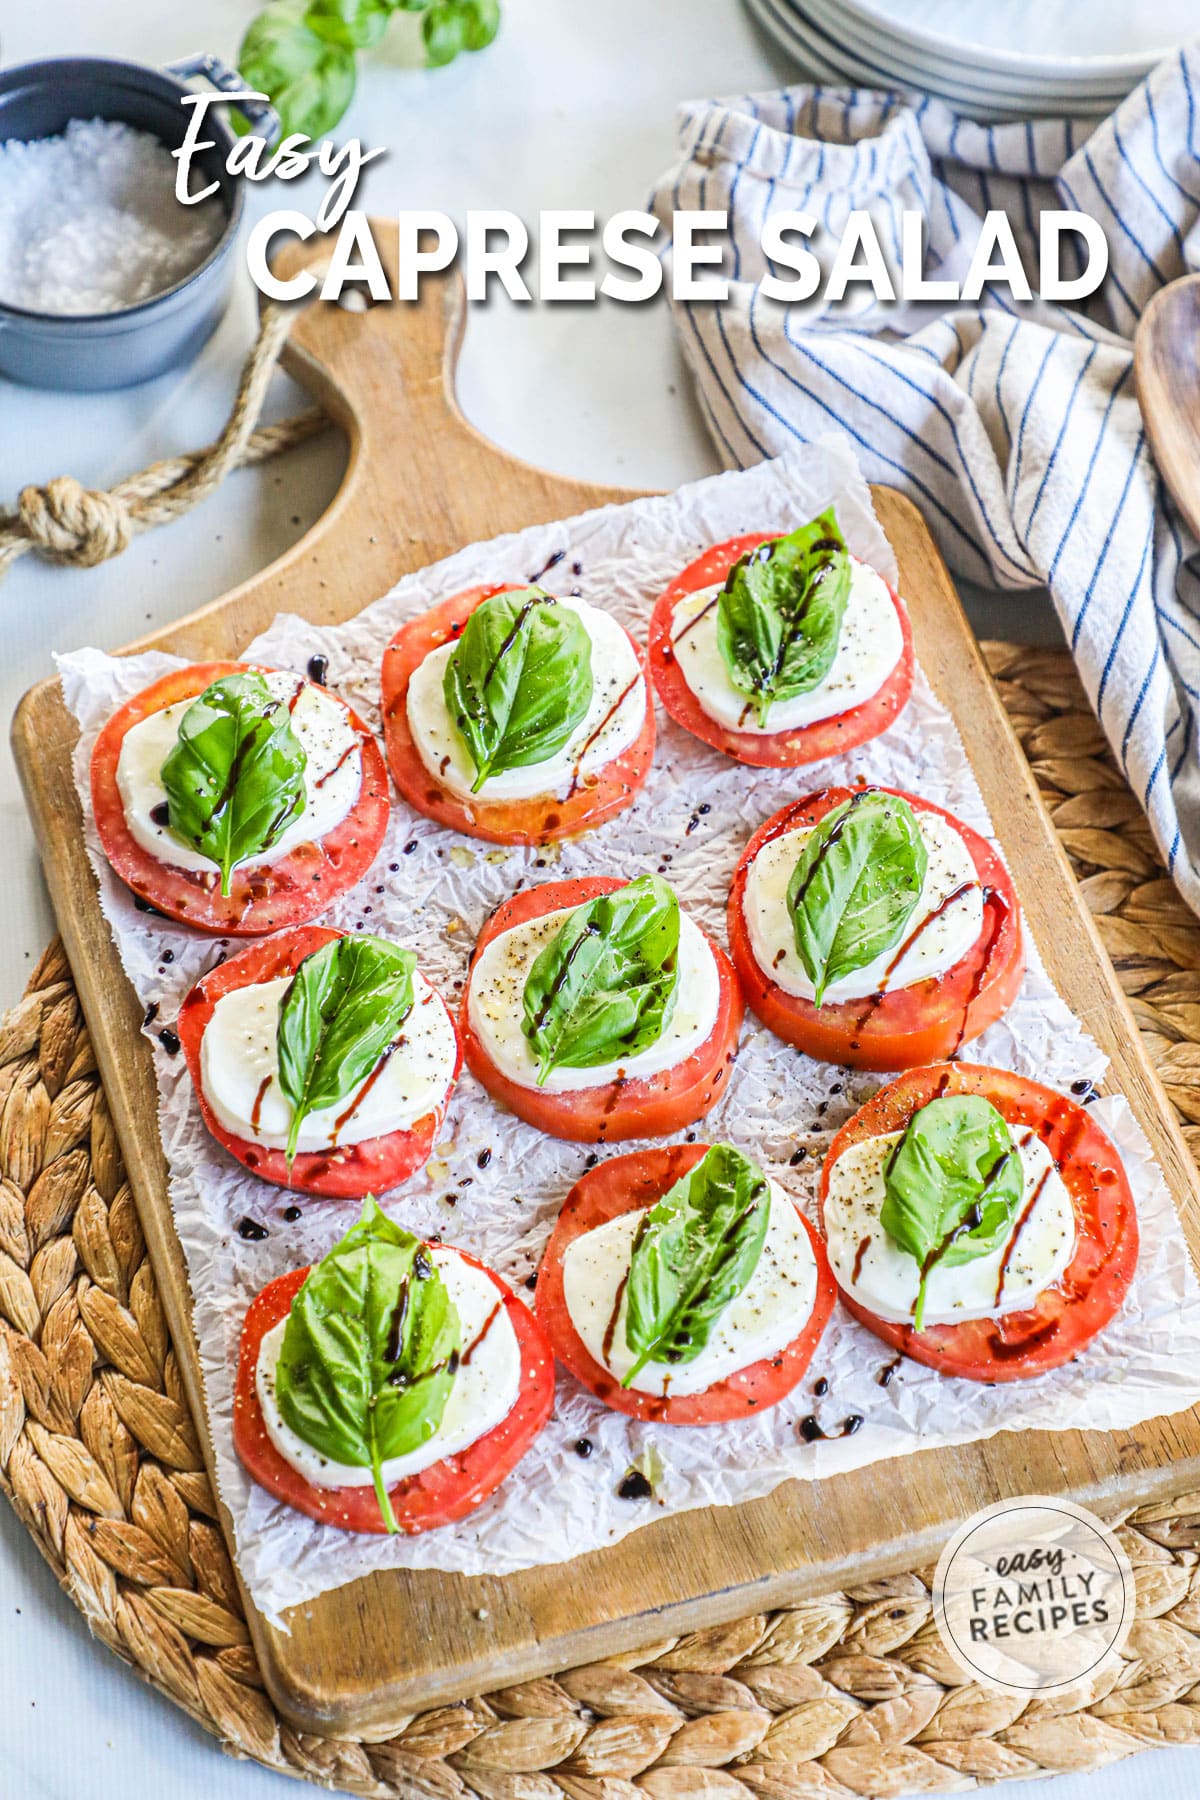 A handled cutting board with a sheet of crinkled parchment paper and caprese salad on top consisting of round slices of tomatoes, sliced cheese, basil, and balsamic glaze.